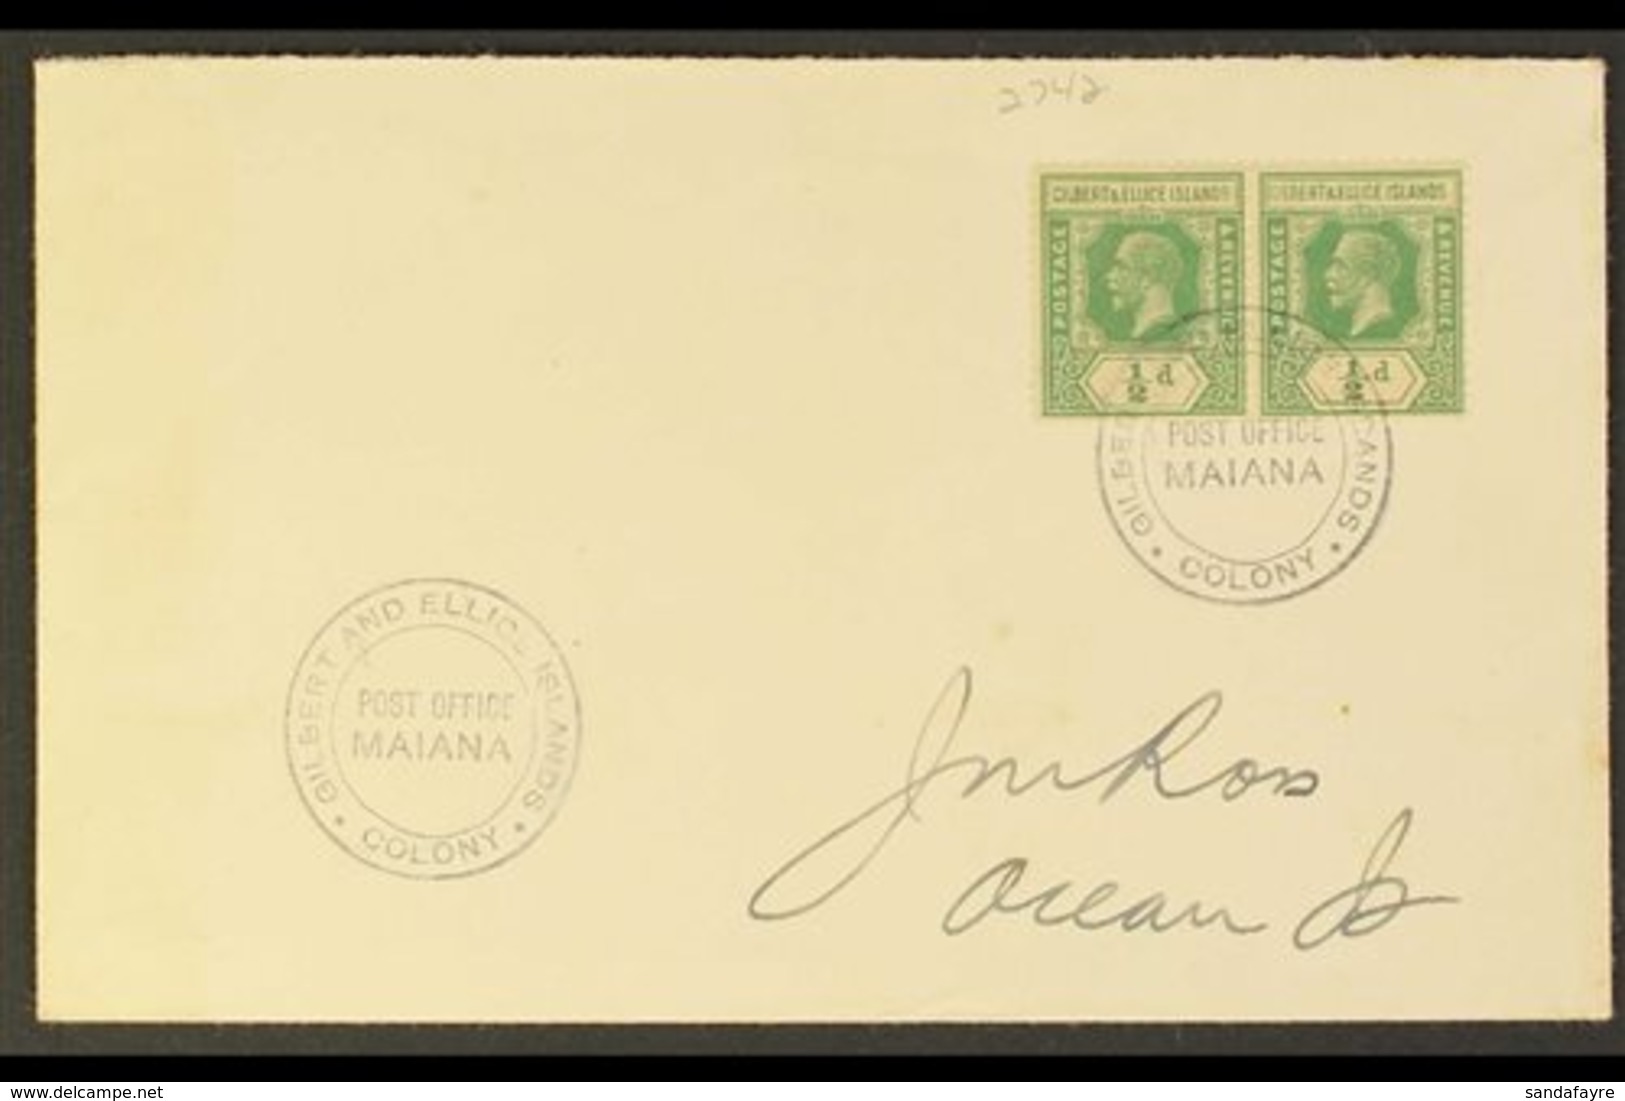 MAIANA 1938 (Dec) Envelope To Ocean Is Bearing KGV ½d Pair Tied By Fine Post Office Maiana Double Ring Undated Cds, Arri - Gilbert & Ellice Islands (...-1979)